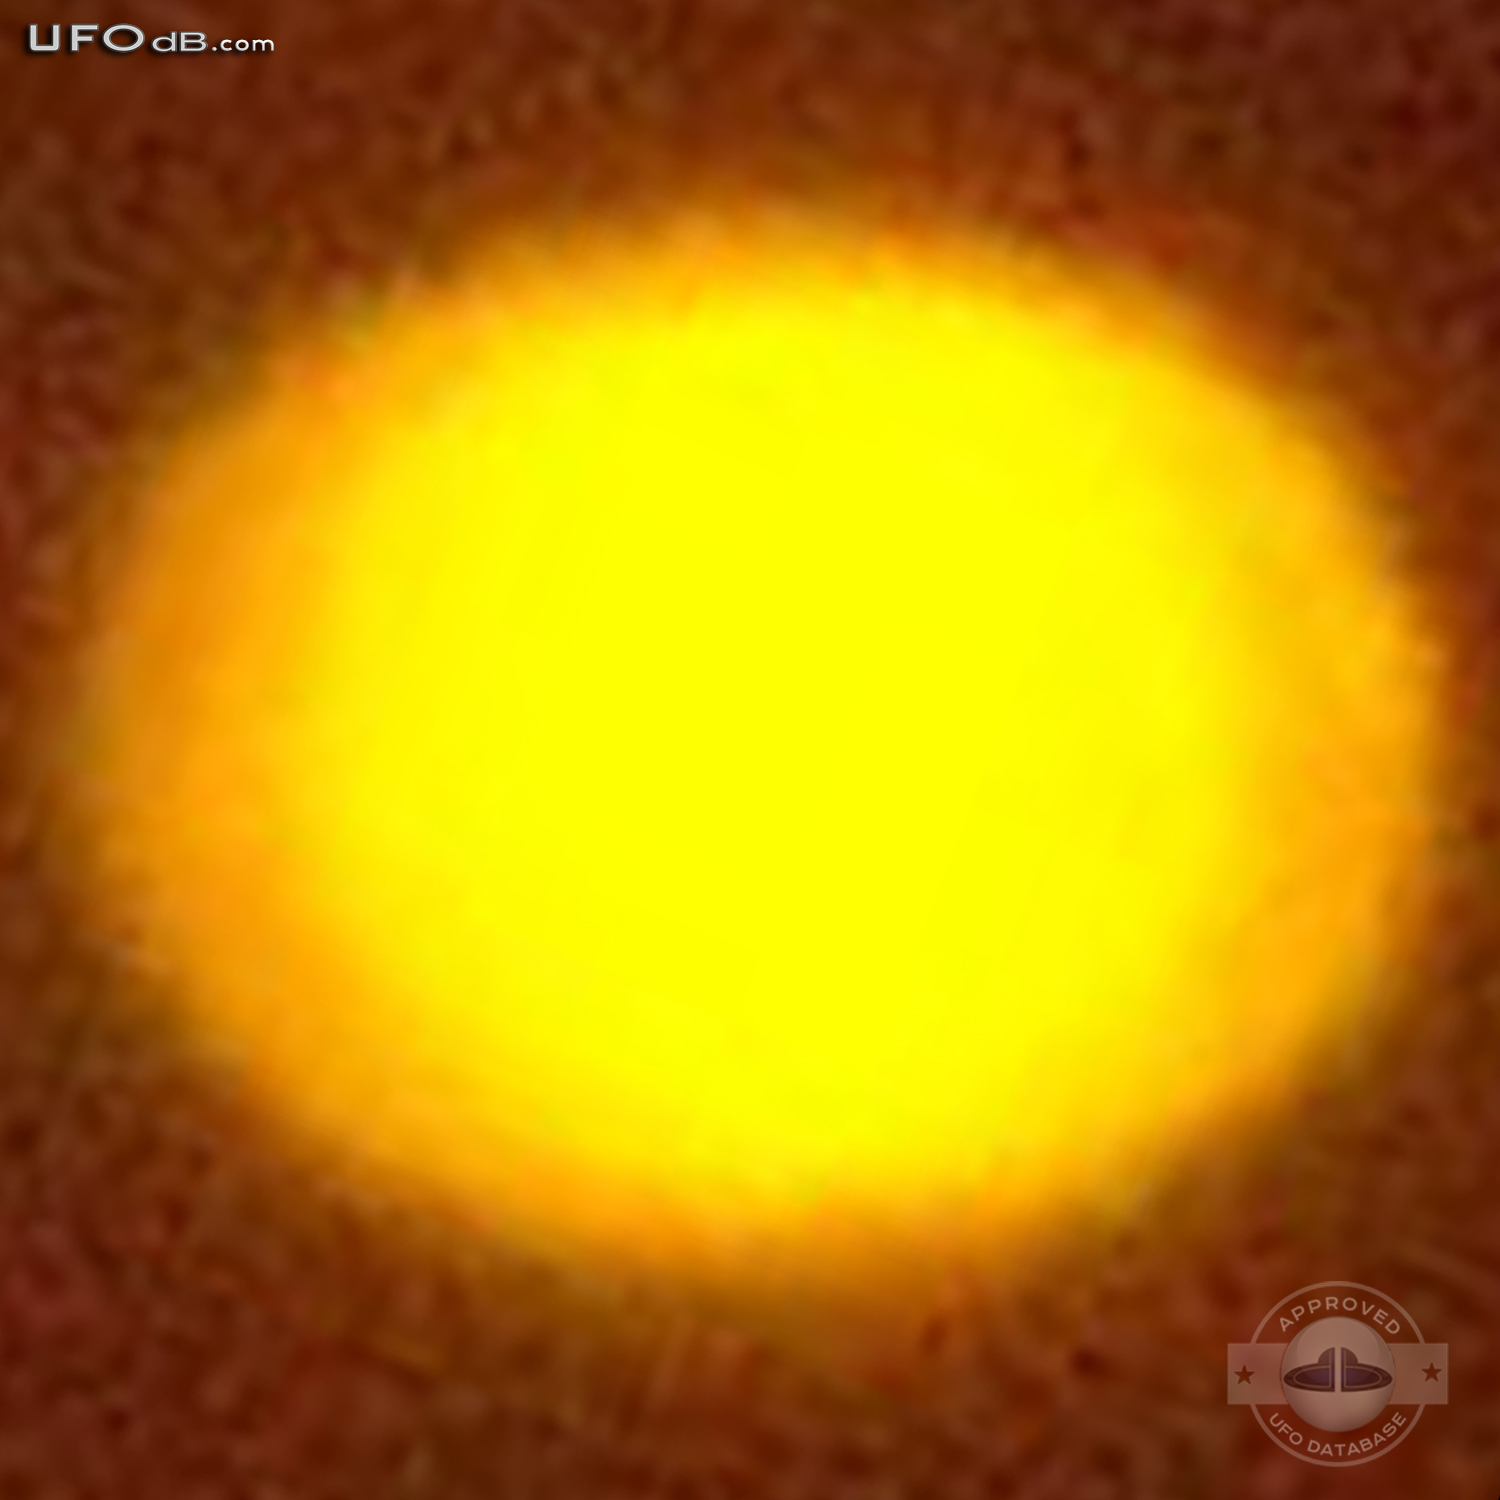 Pulsating Orange UFOs near Fort Carson Army Base | USA | May 12 2011 UFO Picture #310-6